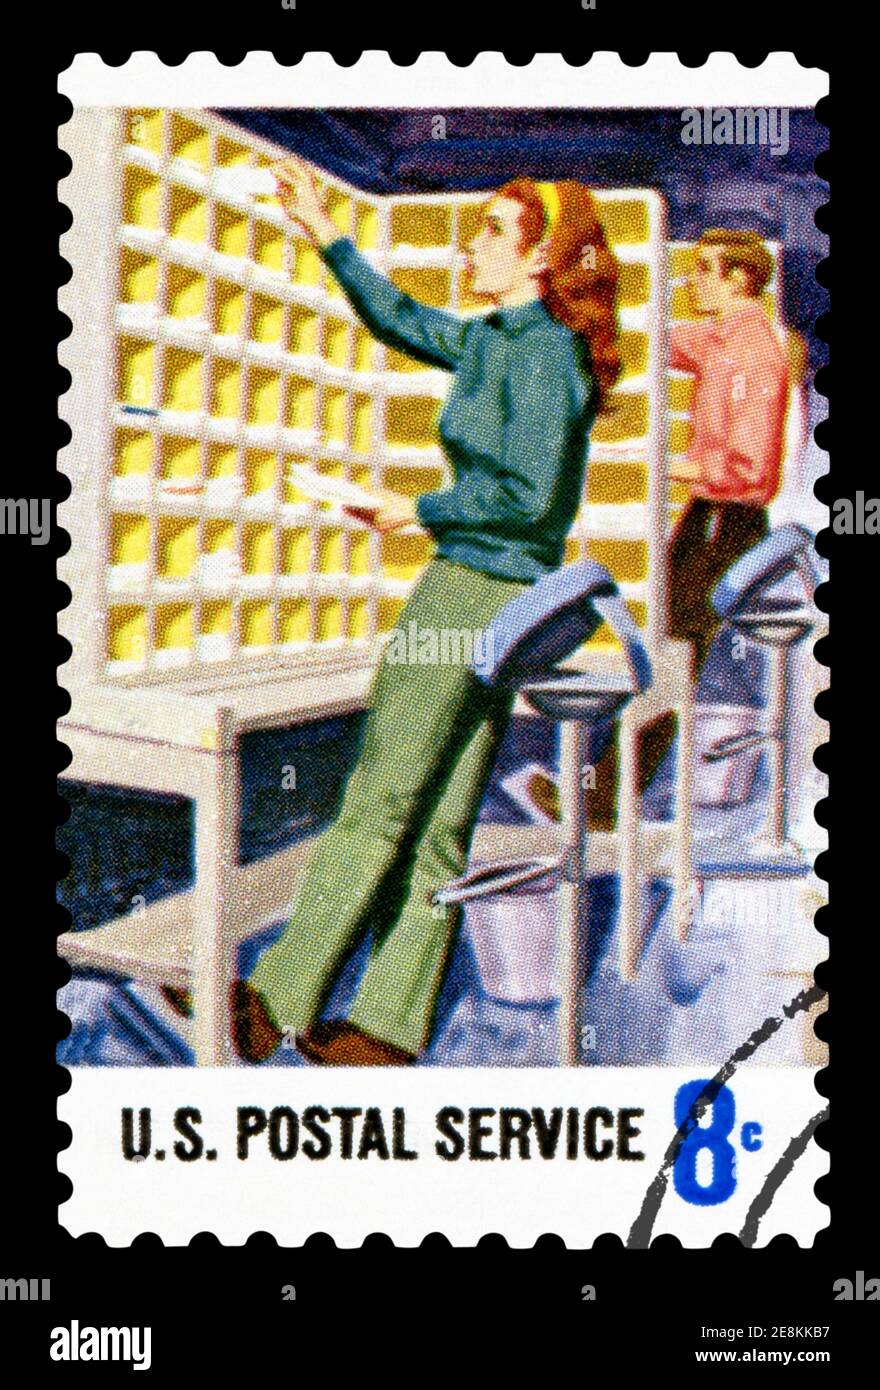 UNITED STATES OF AMERICA - CIRCA 1970: A stamp printed in USA dedicated to postal service, circa 1970 Stock Photo